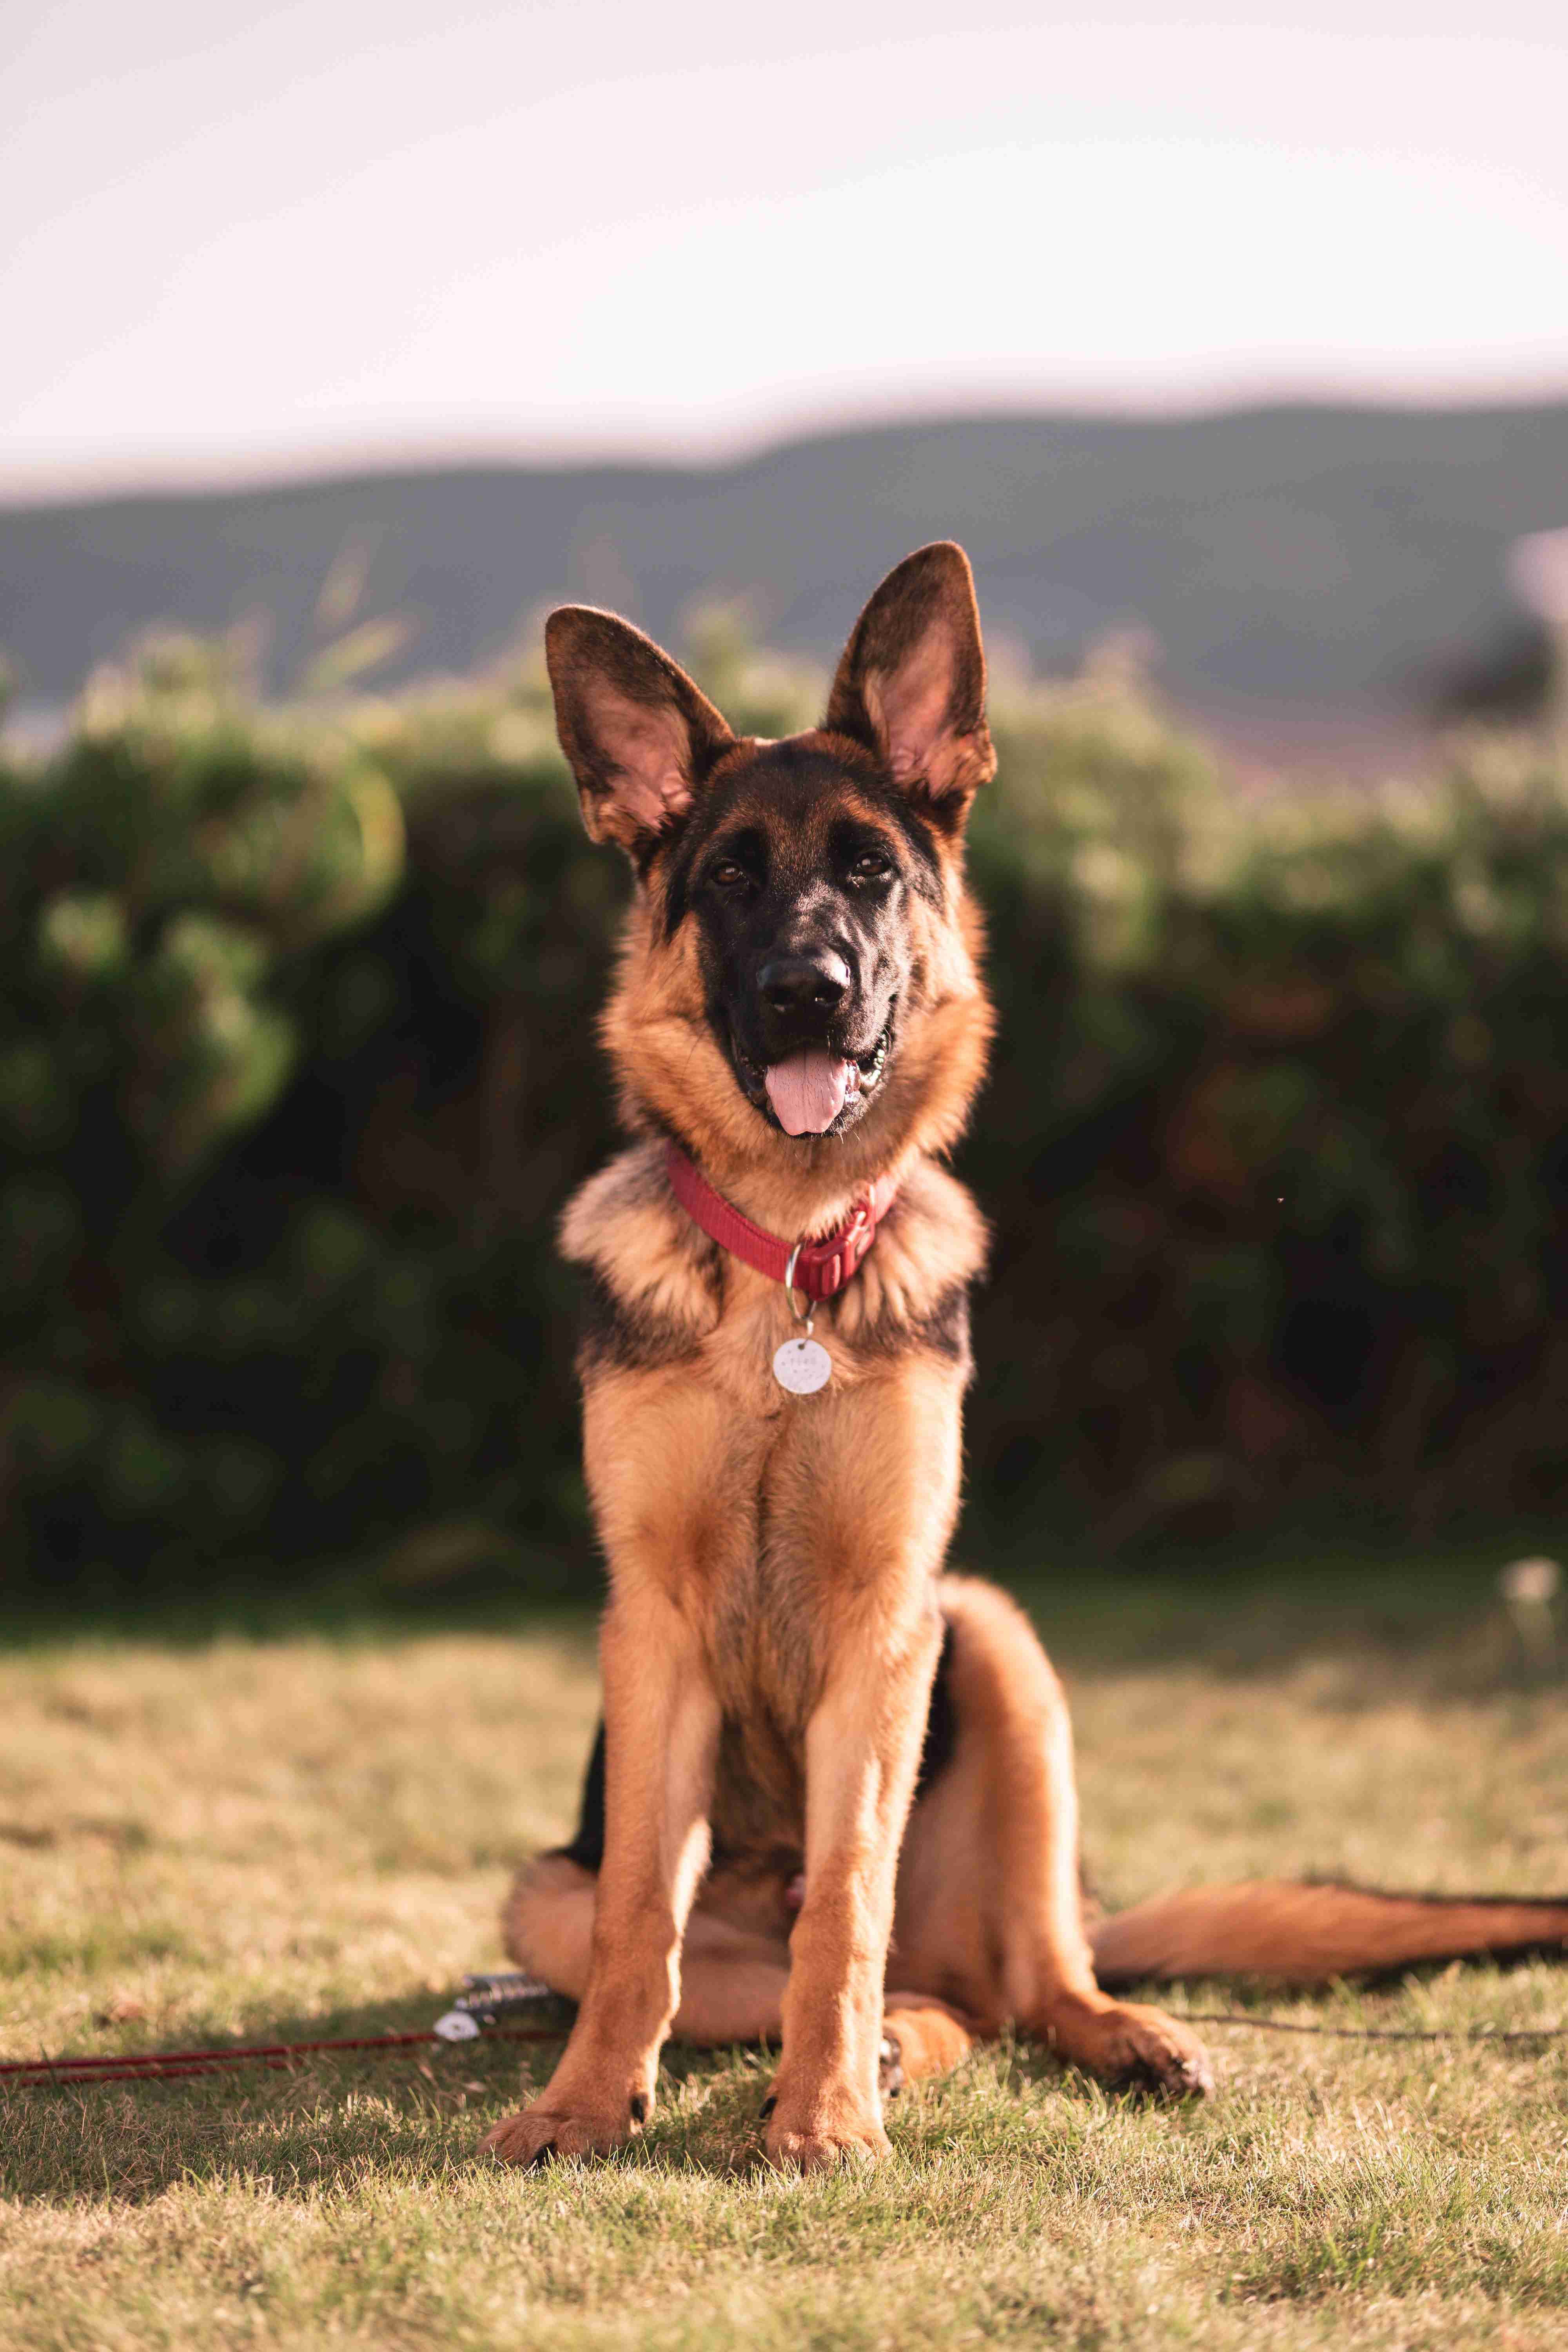 What are the best ways to keep my German Shepherd's paws healthy?